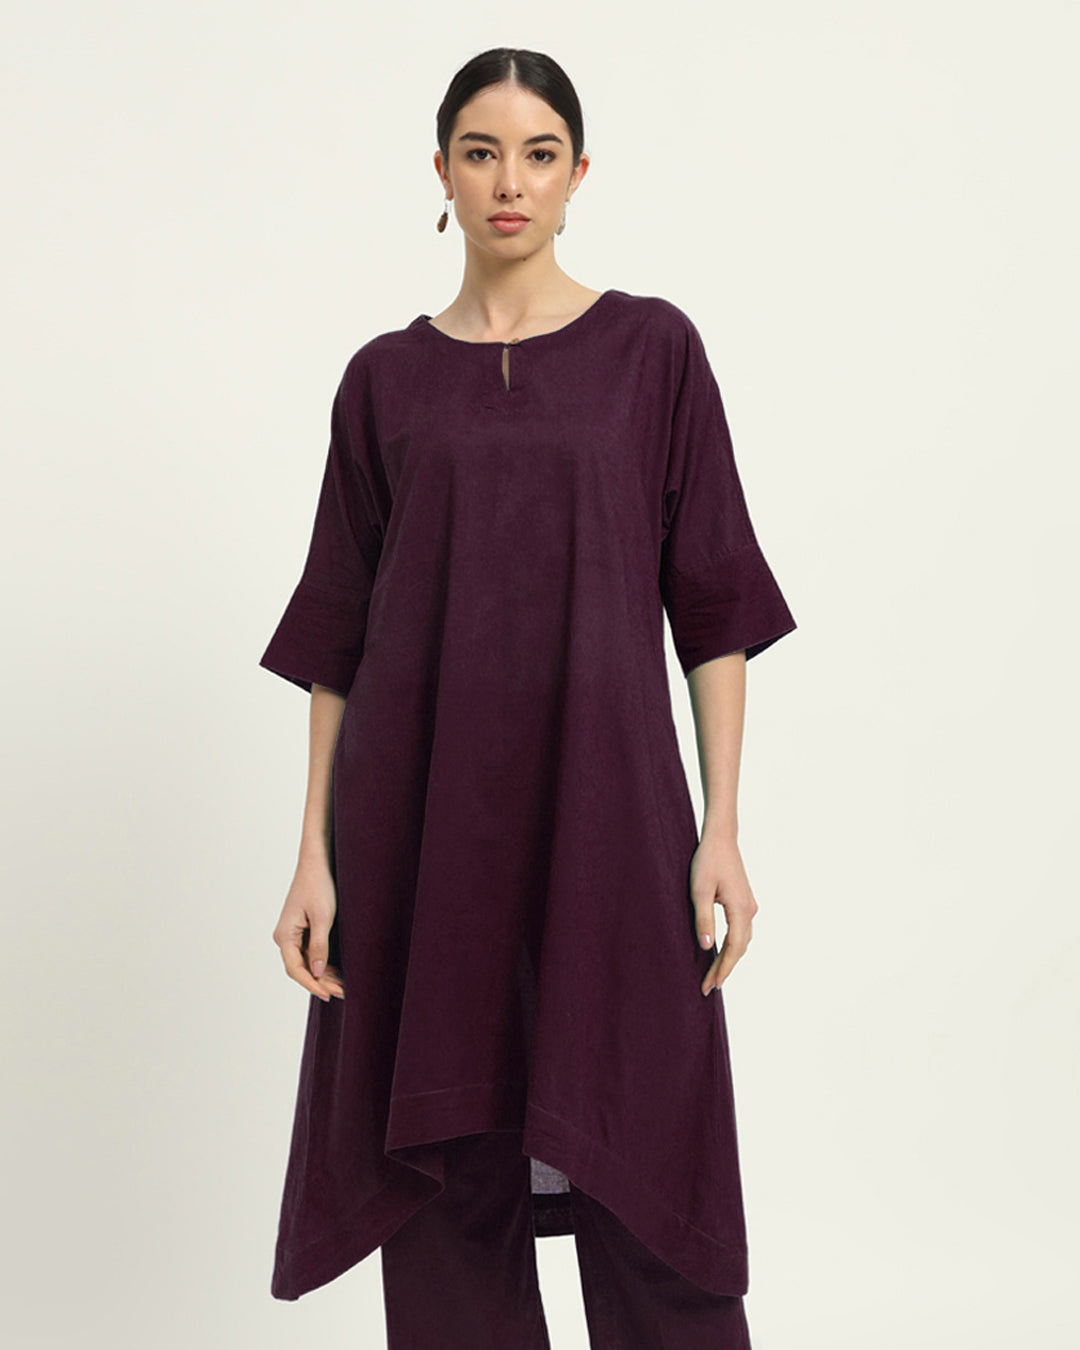 Plum Passion Flare & Flow Boat Neck Solid Kurta (Without Bottoms)